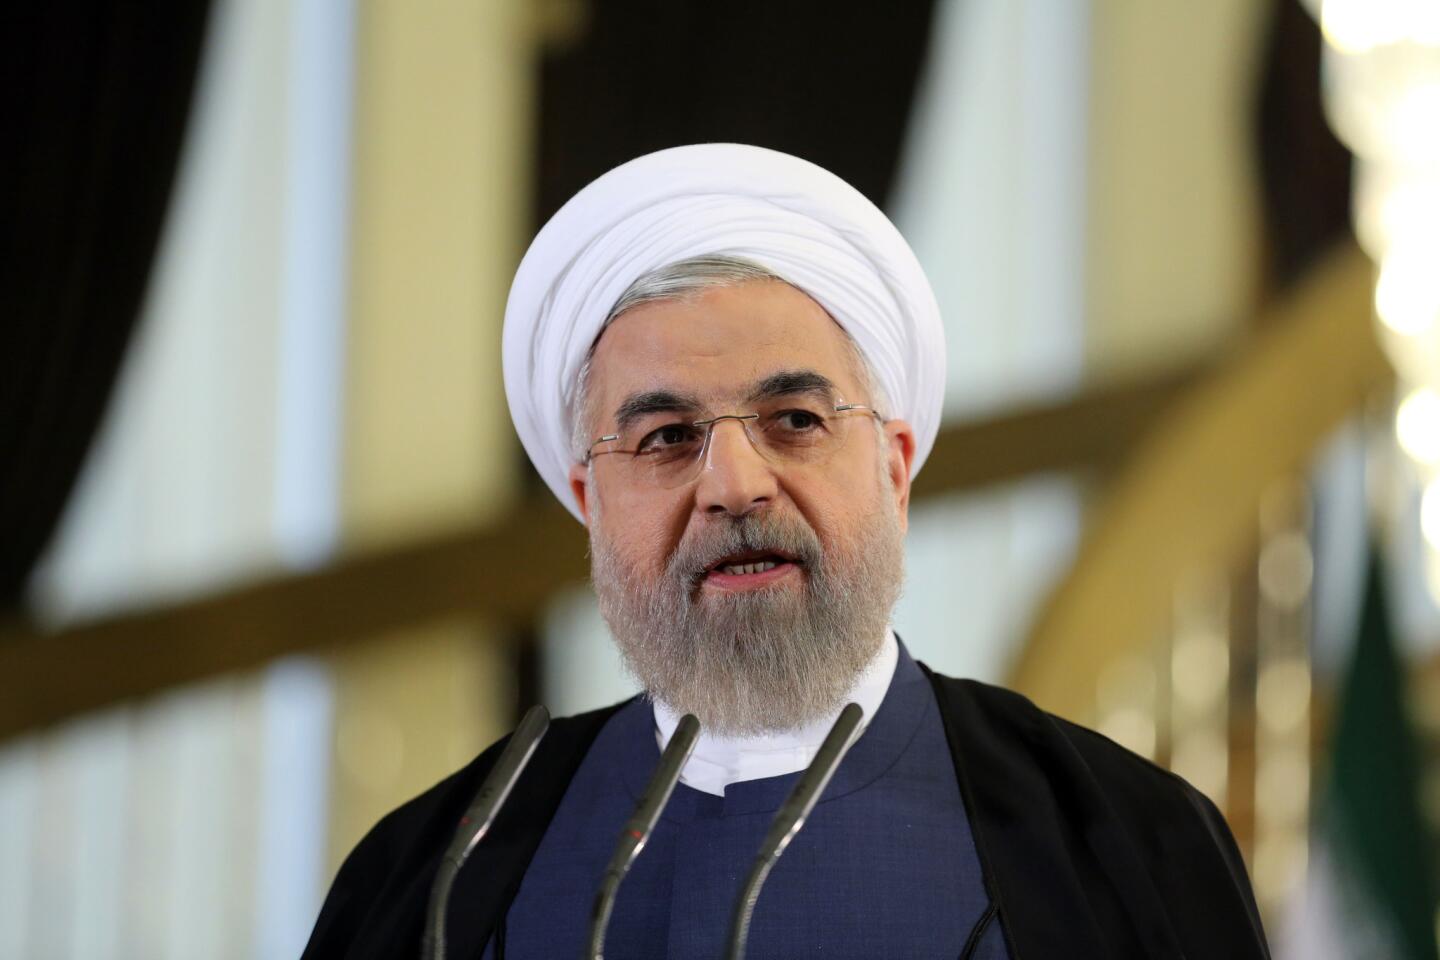 Iranian President Hassan Rouhani speaks during a press conference in Tehran on April 3, 2015. Iran vowed to stand by a nuclear deal with world powers as Rouhani promised it would open a "new page" in the country's global ties.